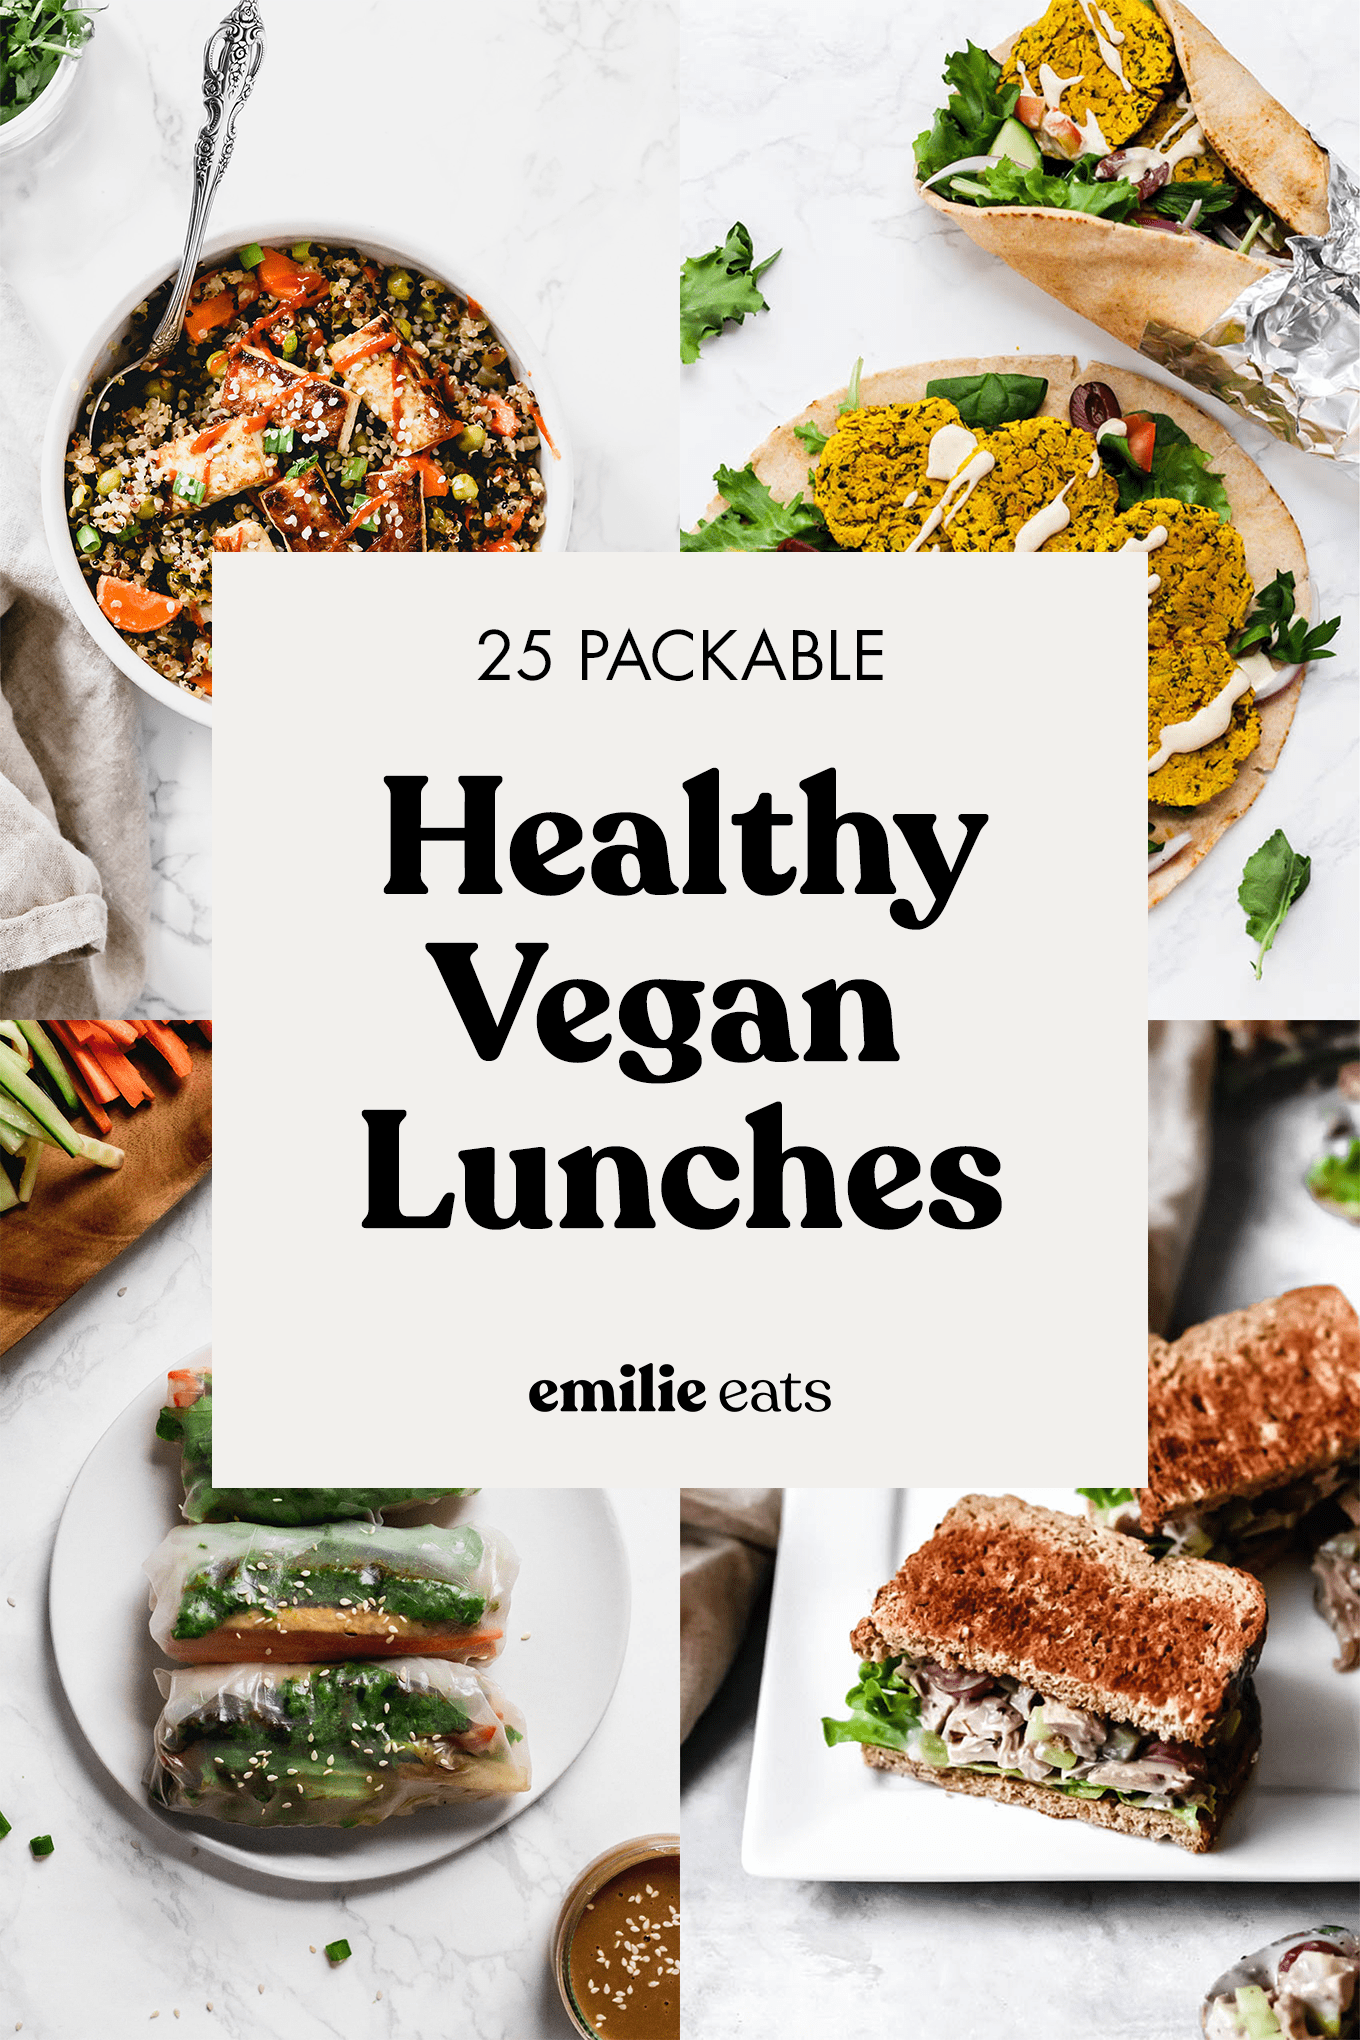 https://www.emilieeats.com/wp-content/uploads/2016/01/25-packable-healthy-vegan-lunches-for-work-hero.png